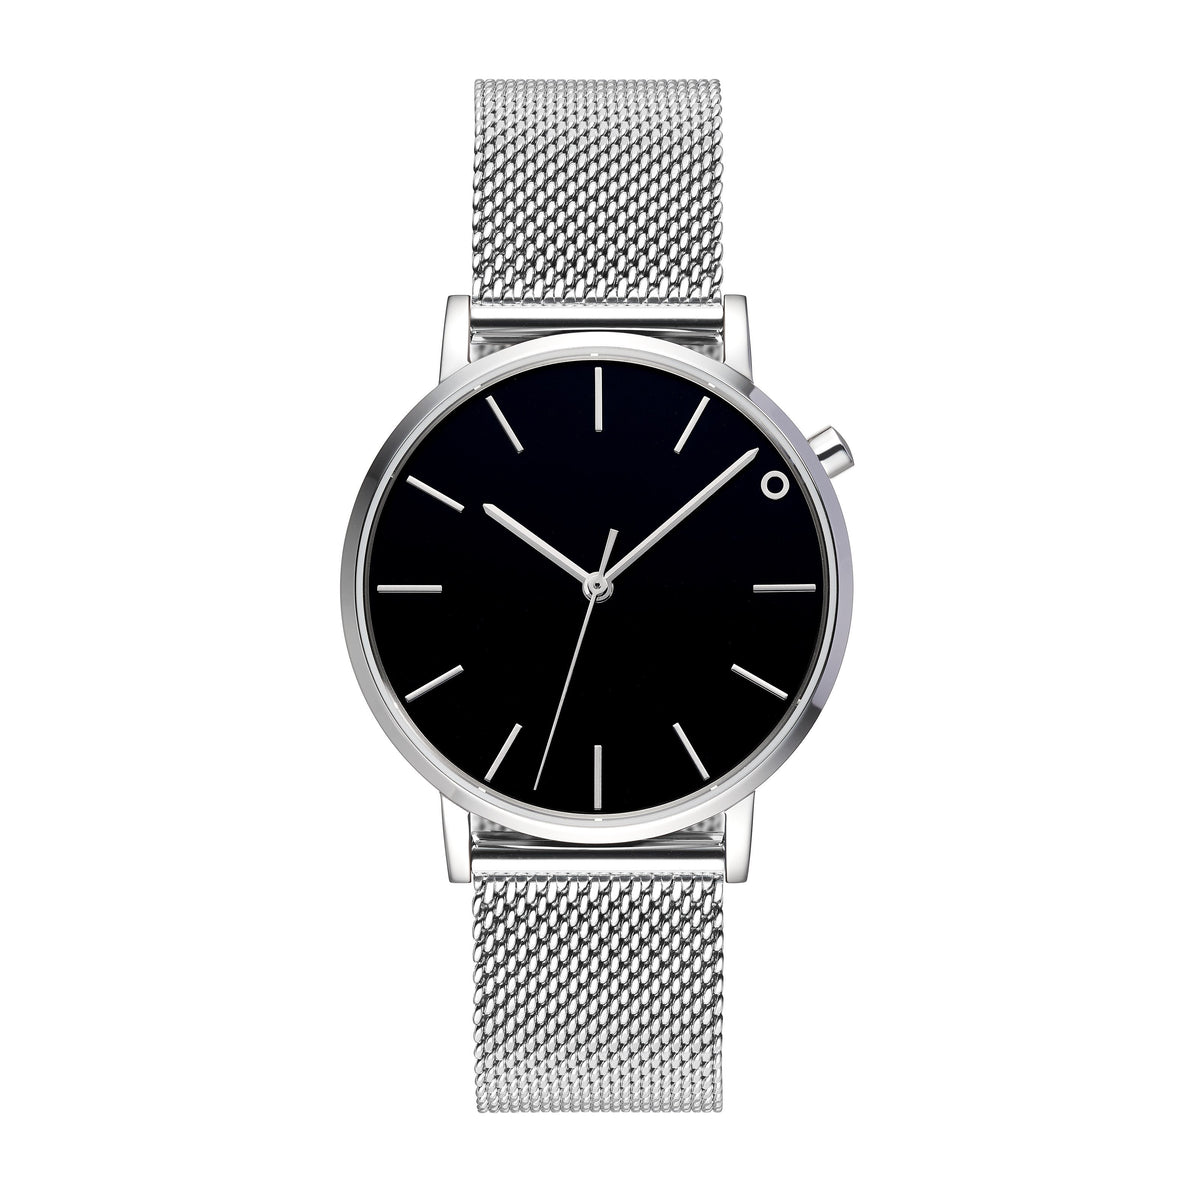 The Black and Silver Watch - Mesh